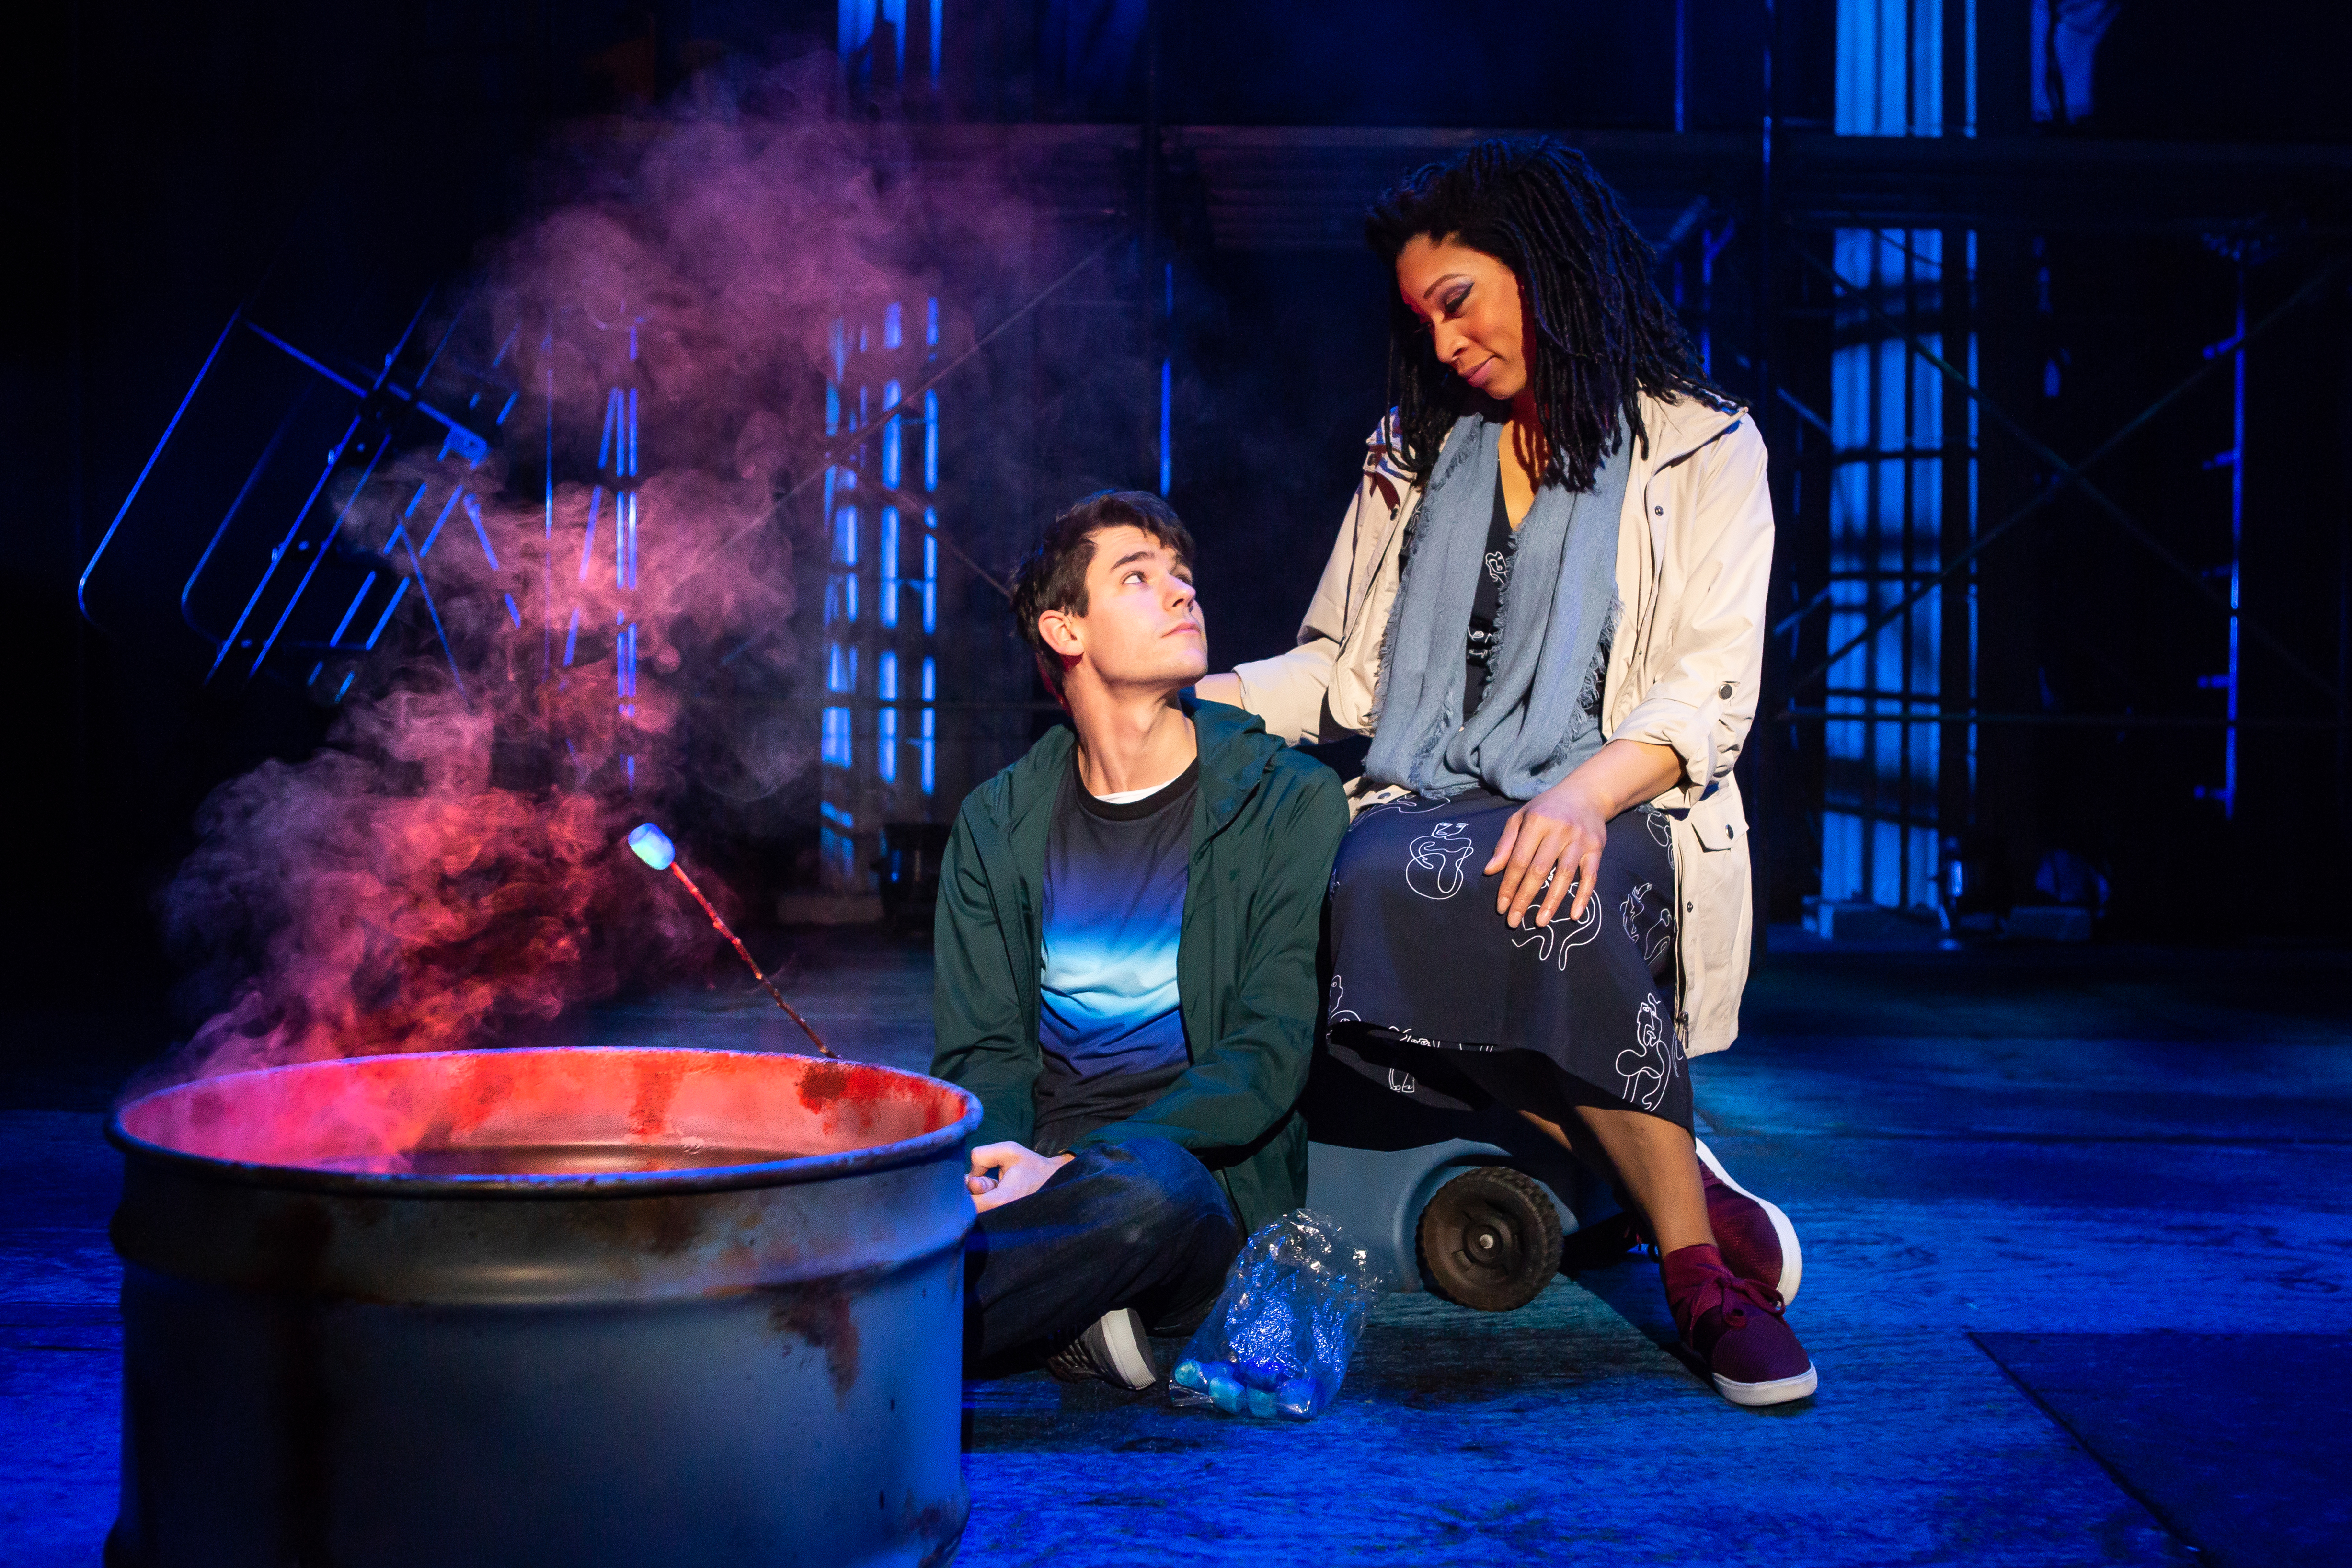 Roasting marshmallows in “The Lightning Thief: The Percy Jackson Musical”